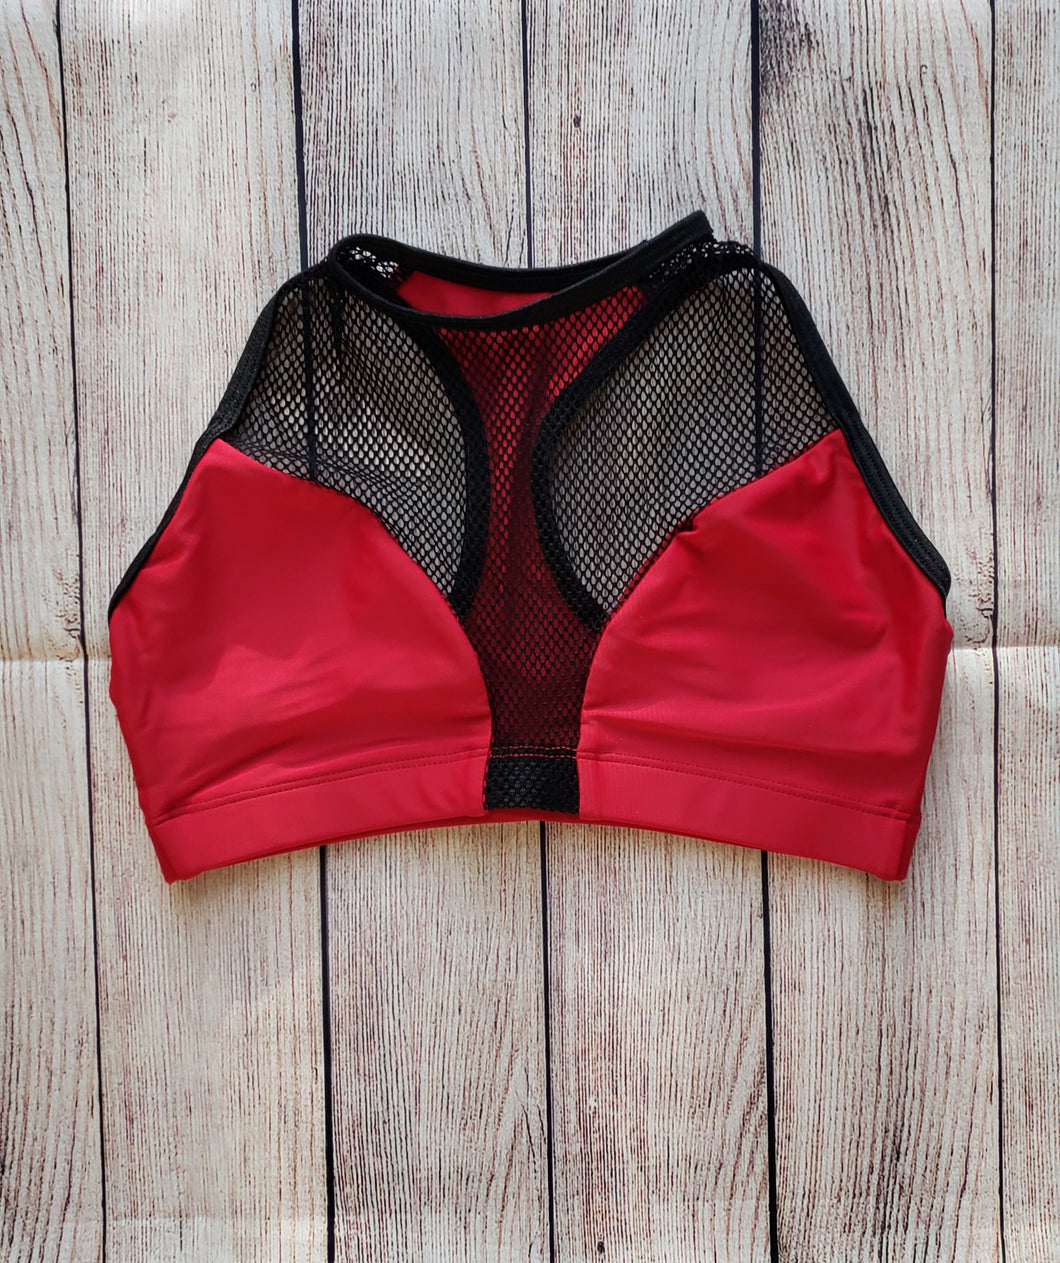 Extra Small Red Fishnet Sports Bra - FINAL SALE